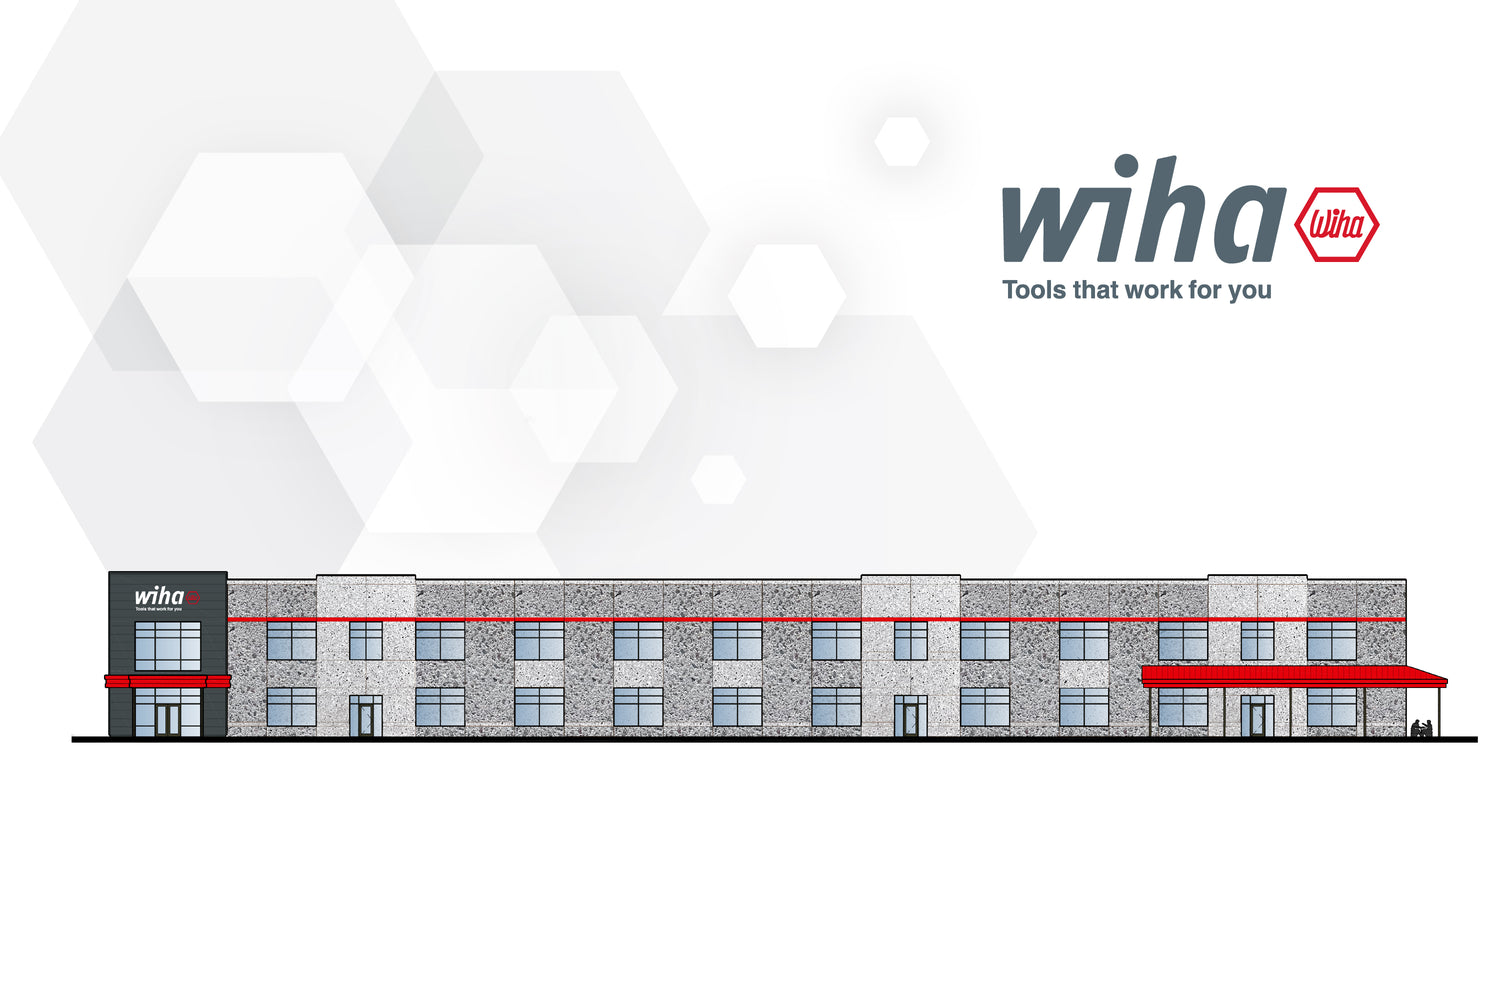 Wiha Tools USA to Build New State-of-the-Art Logistics Center and American Headquarters